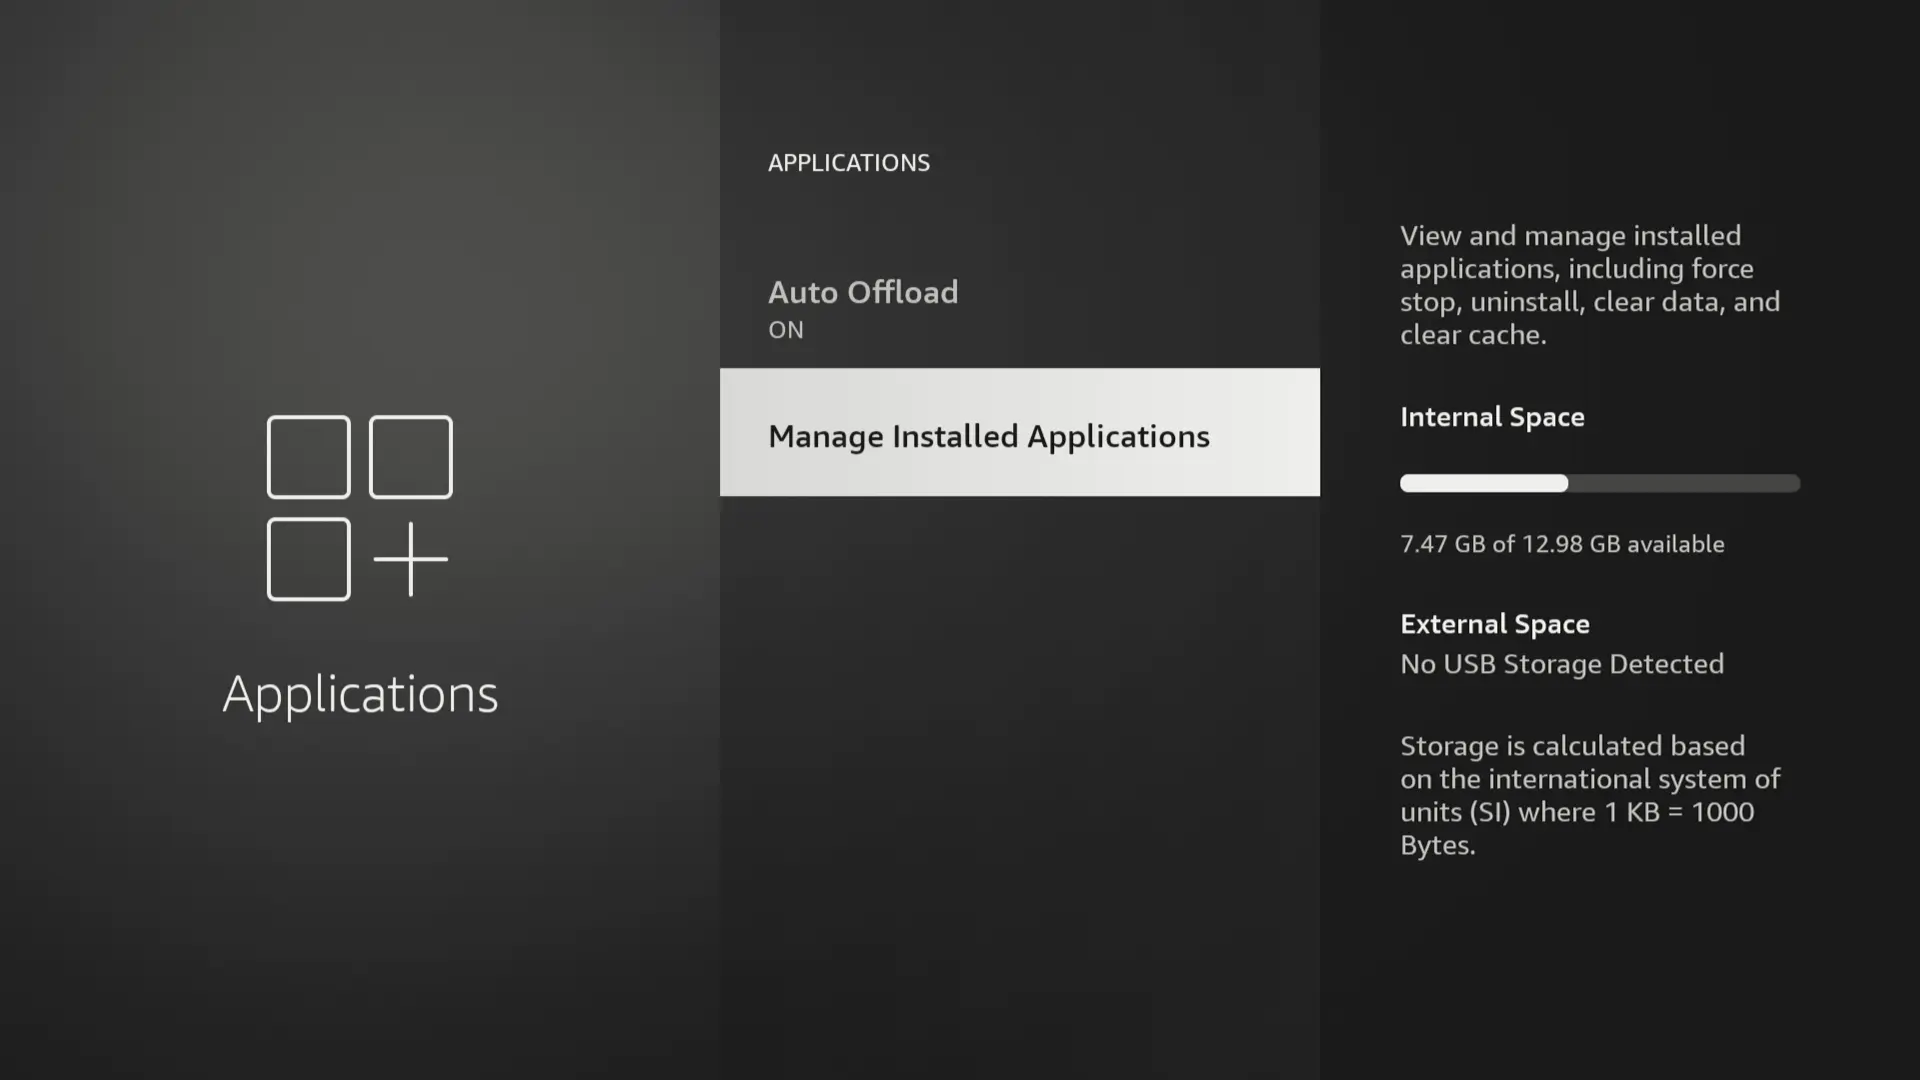 Installing a VPN on Fire TV Stick with .apk file #6